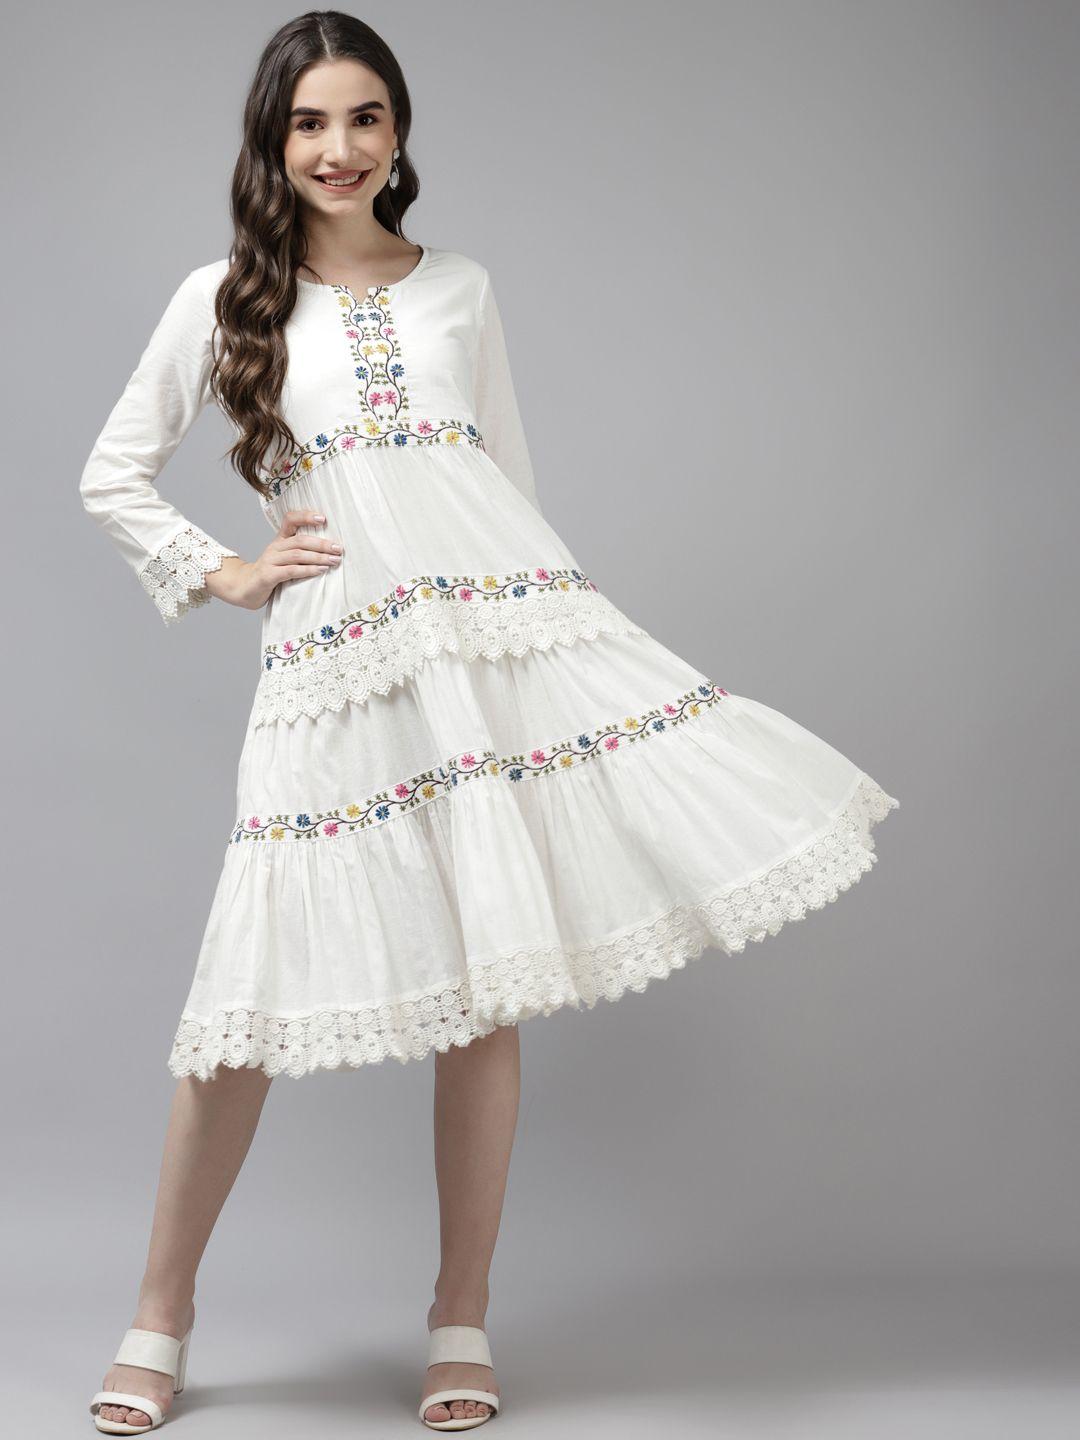 prakrti off white & pink floral embroidered tiered pure cotton a-line midi dress